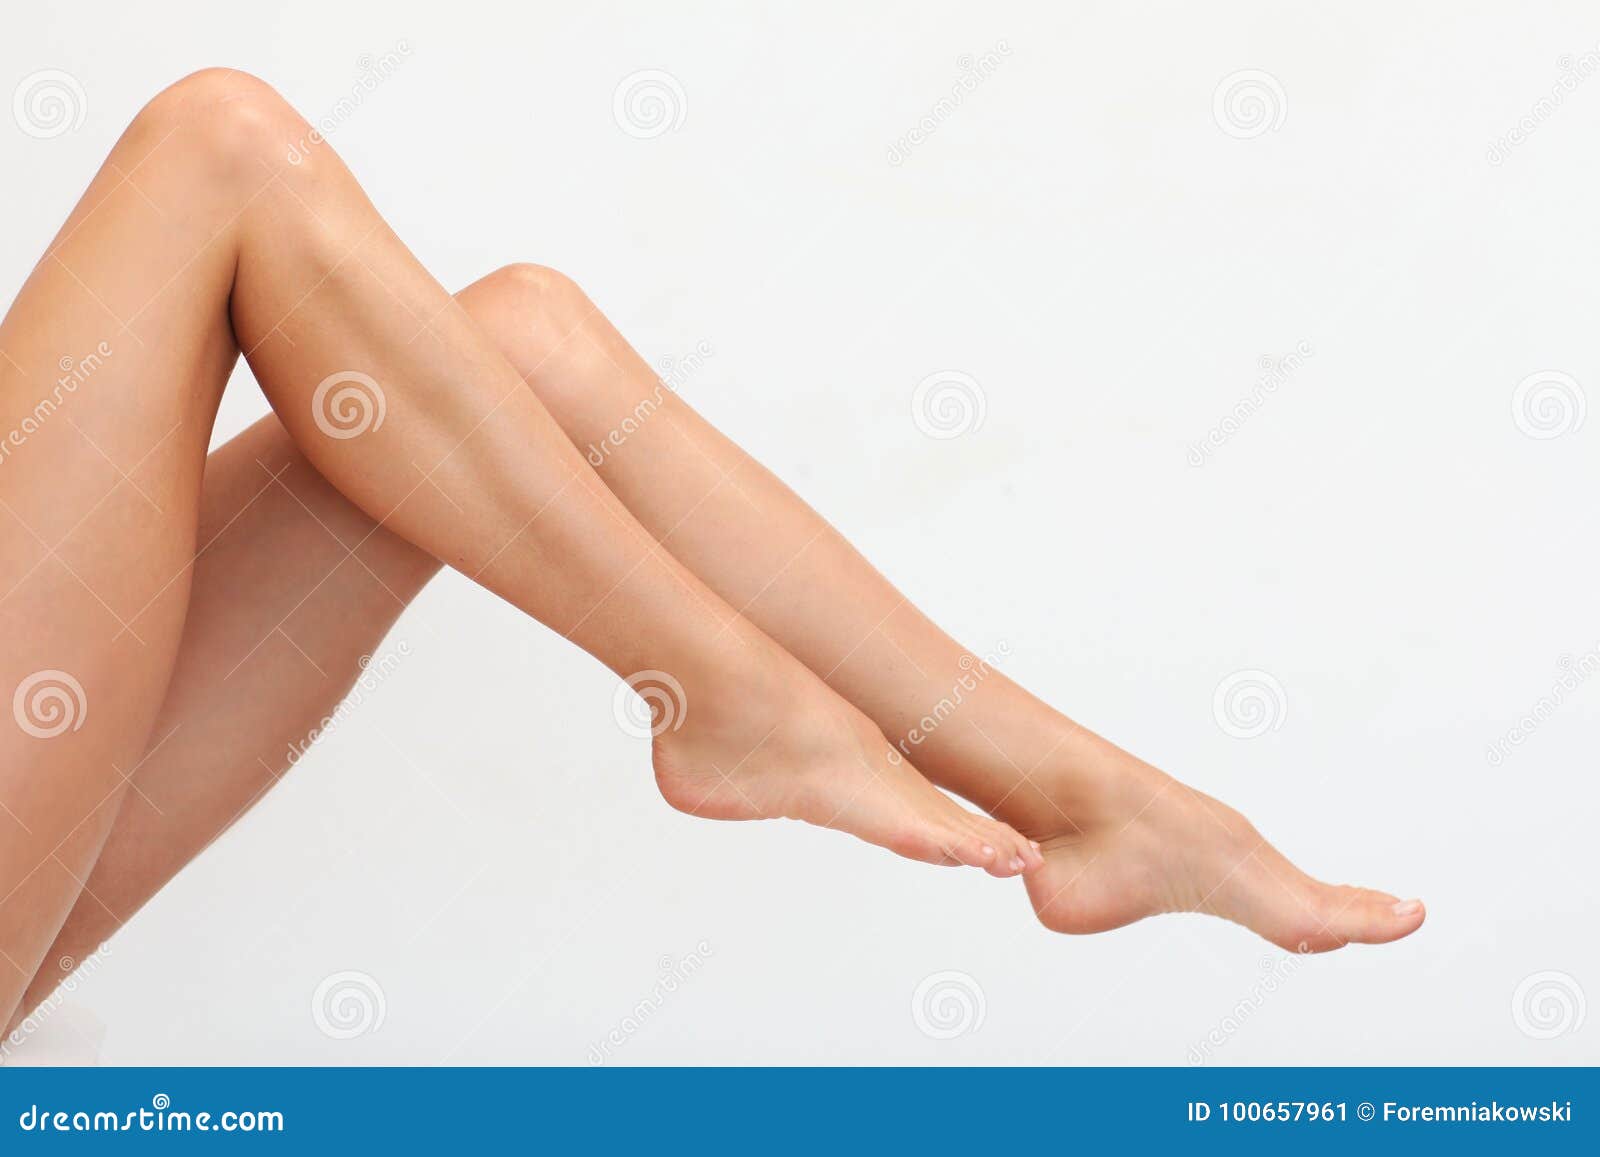 Pretty Legs Images